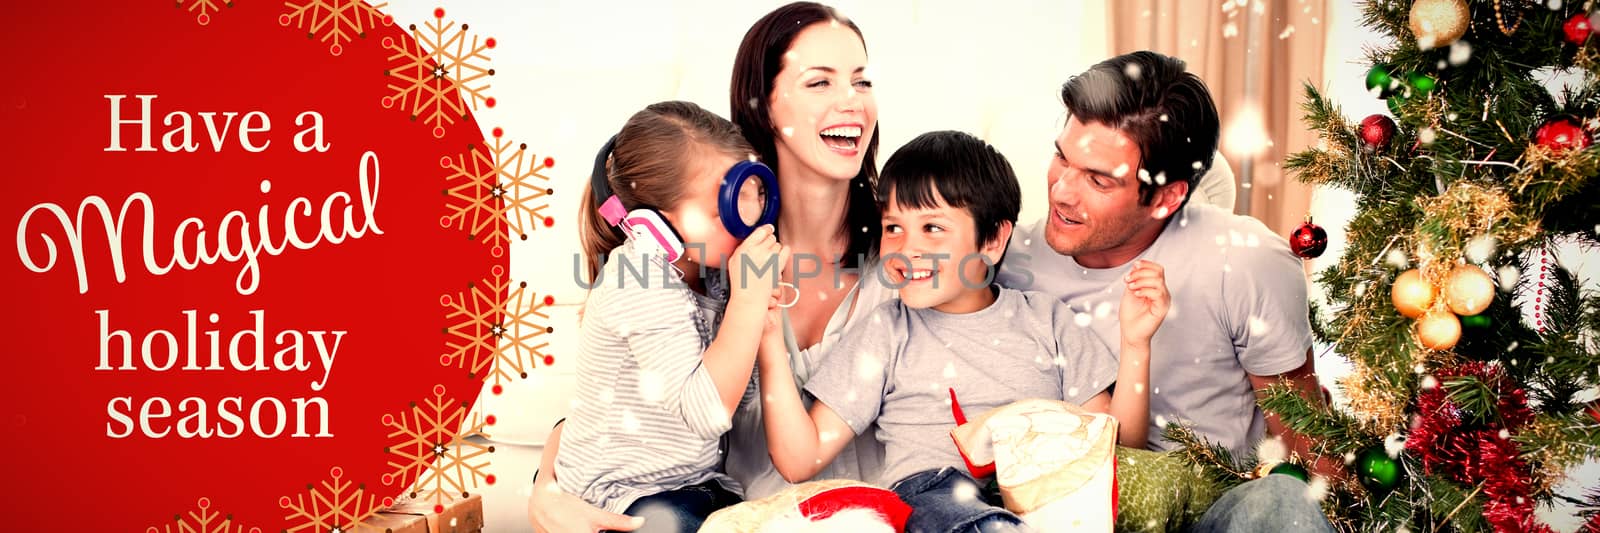 Composite image of happy family playing with christmas gifts by Wavebreakmedia